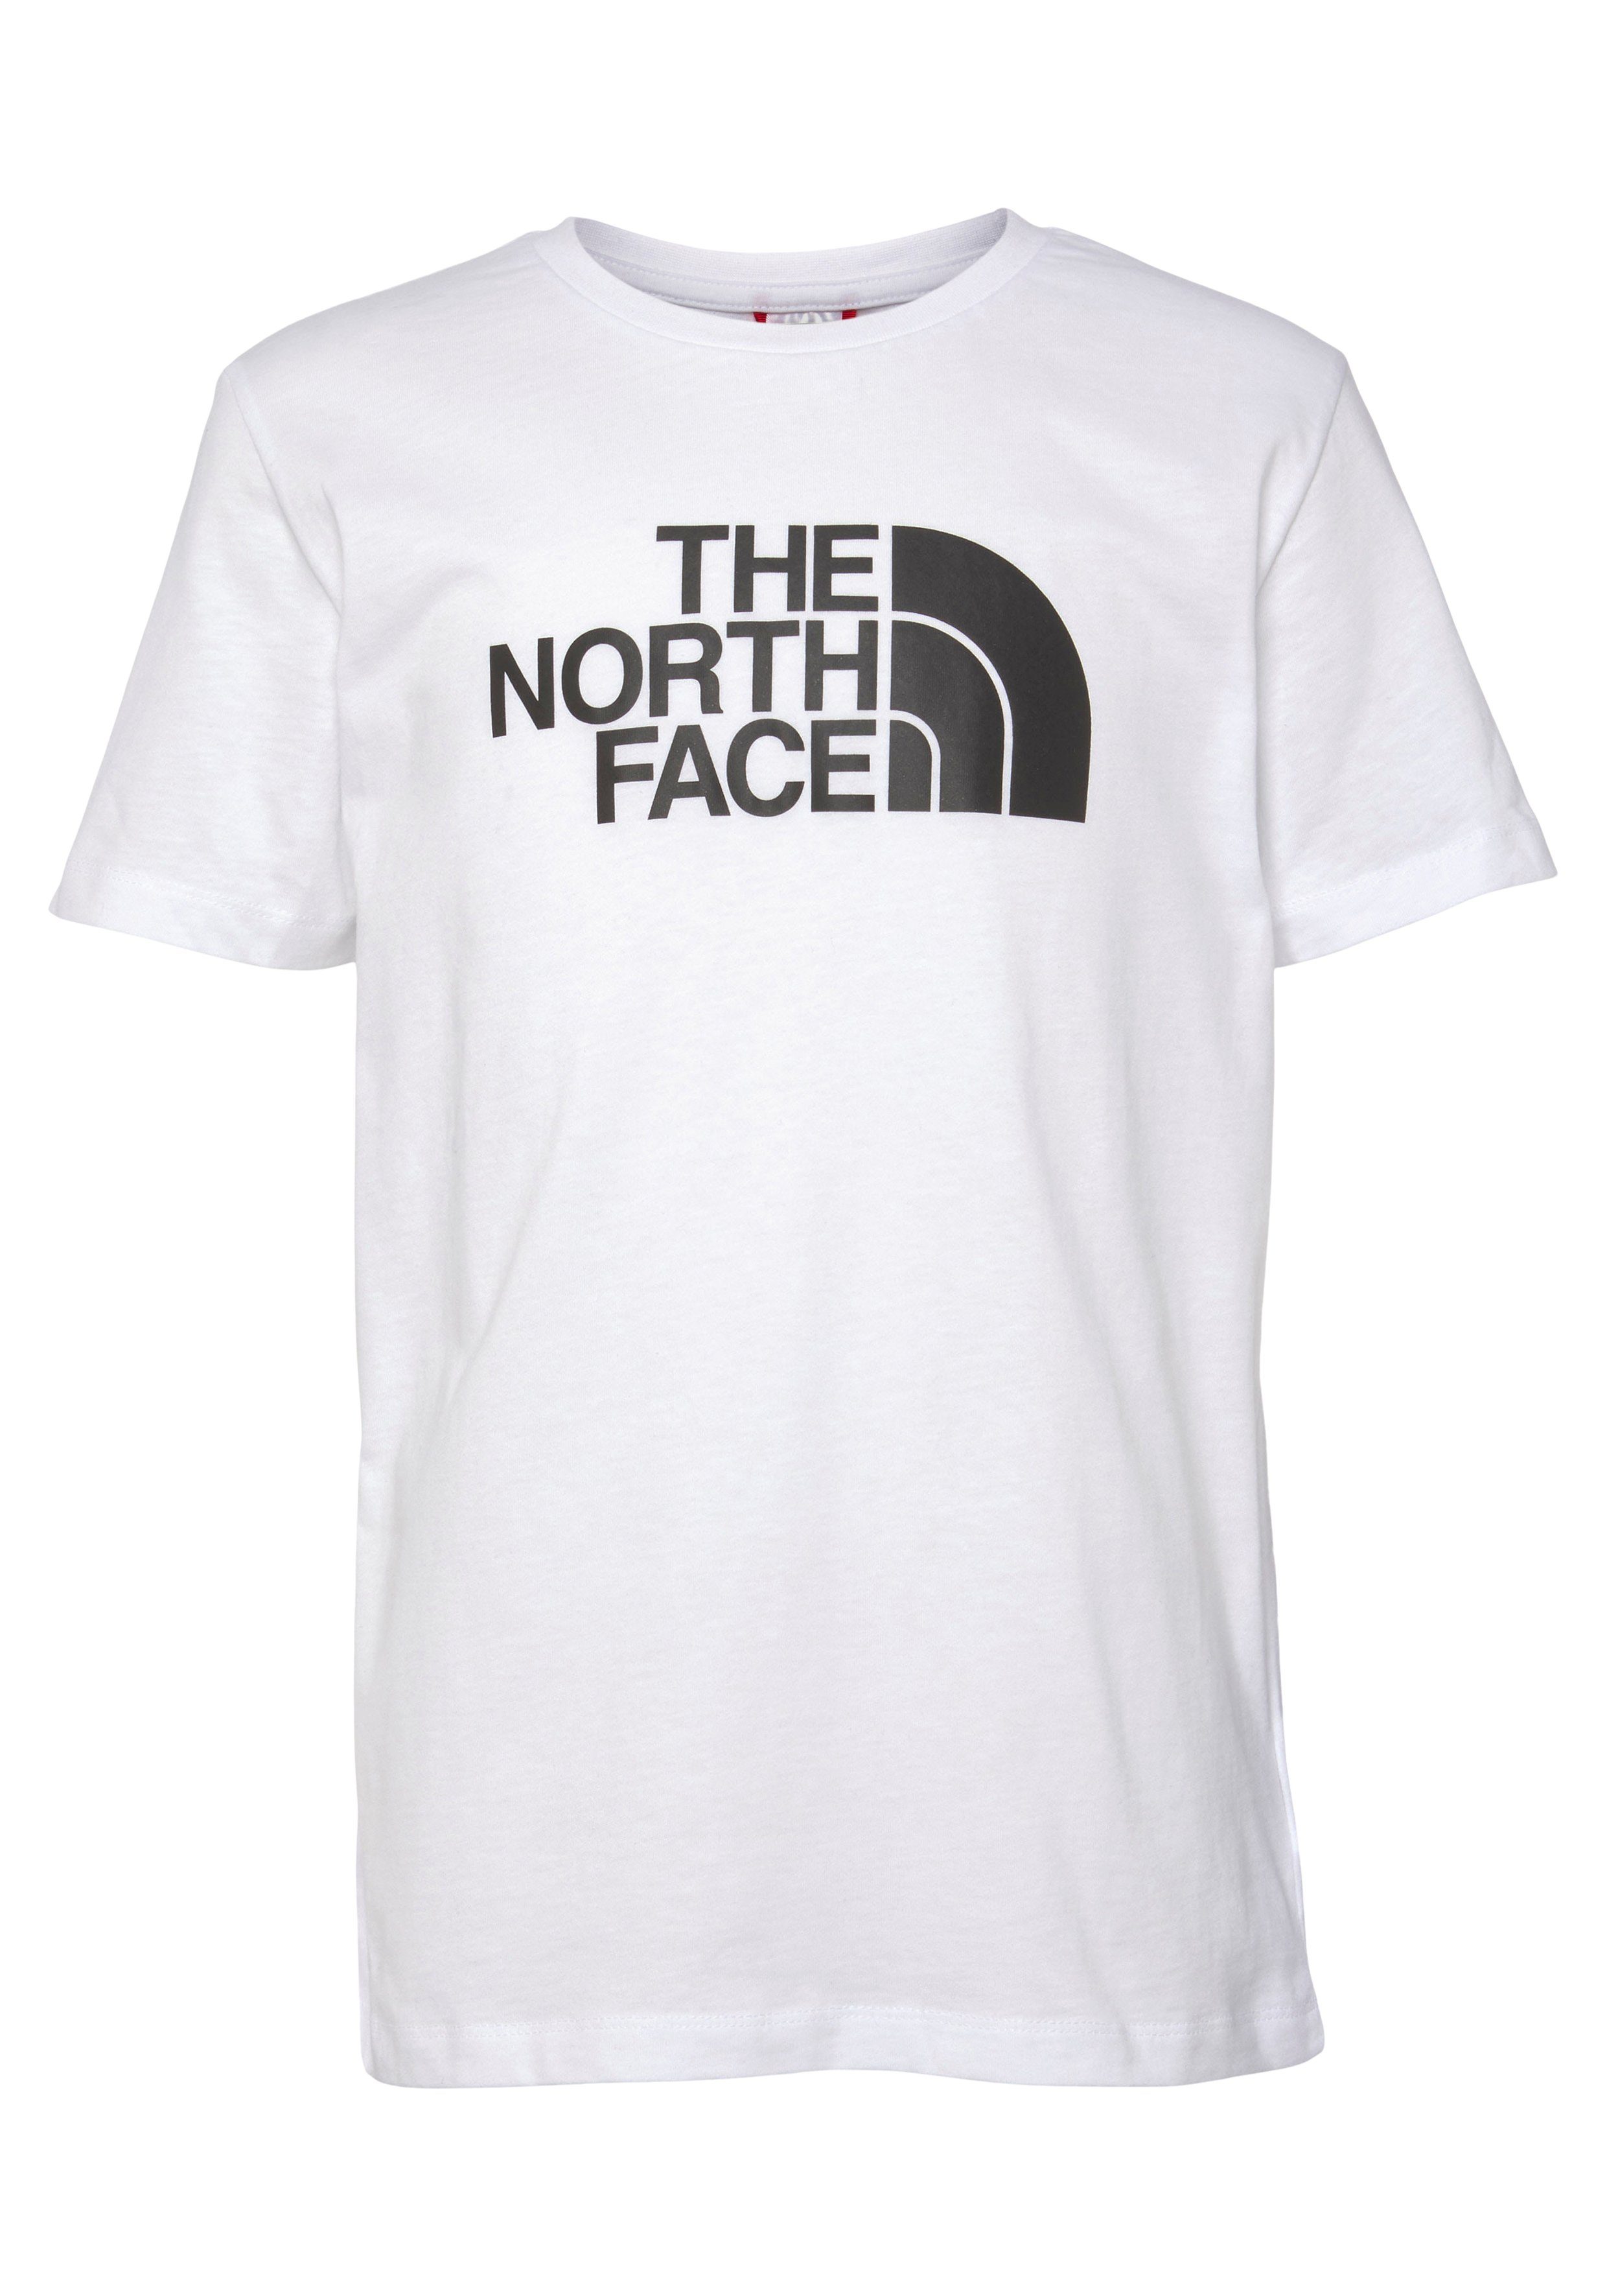 EASY North white - TEE The Kinder Face T-Shirt für